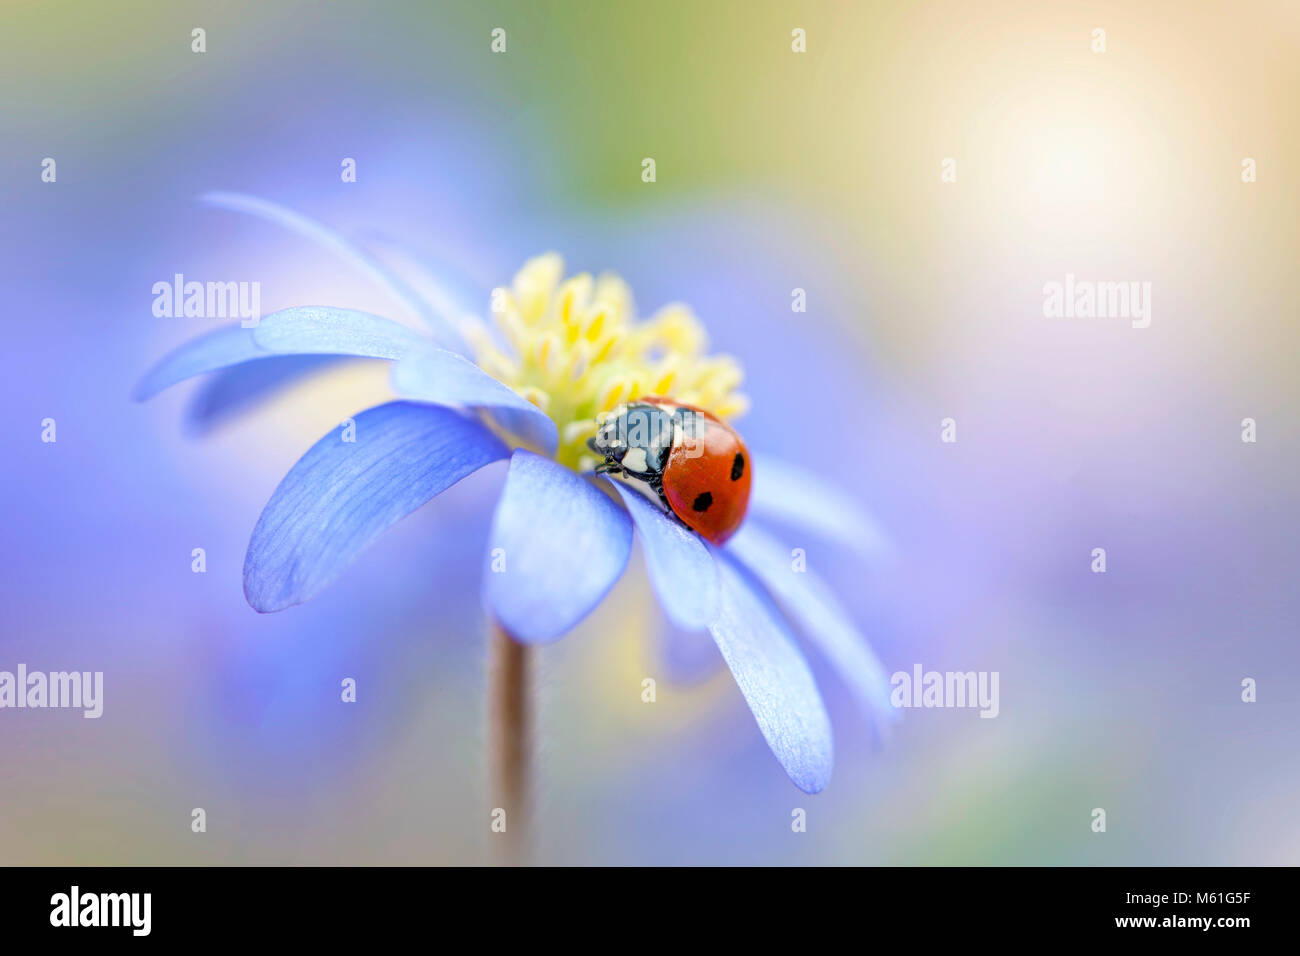 Close-up of a 7-spot ladybird resting on the blue petal of a spring, Anemone blana or winter windflower Stock Photo